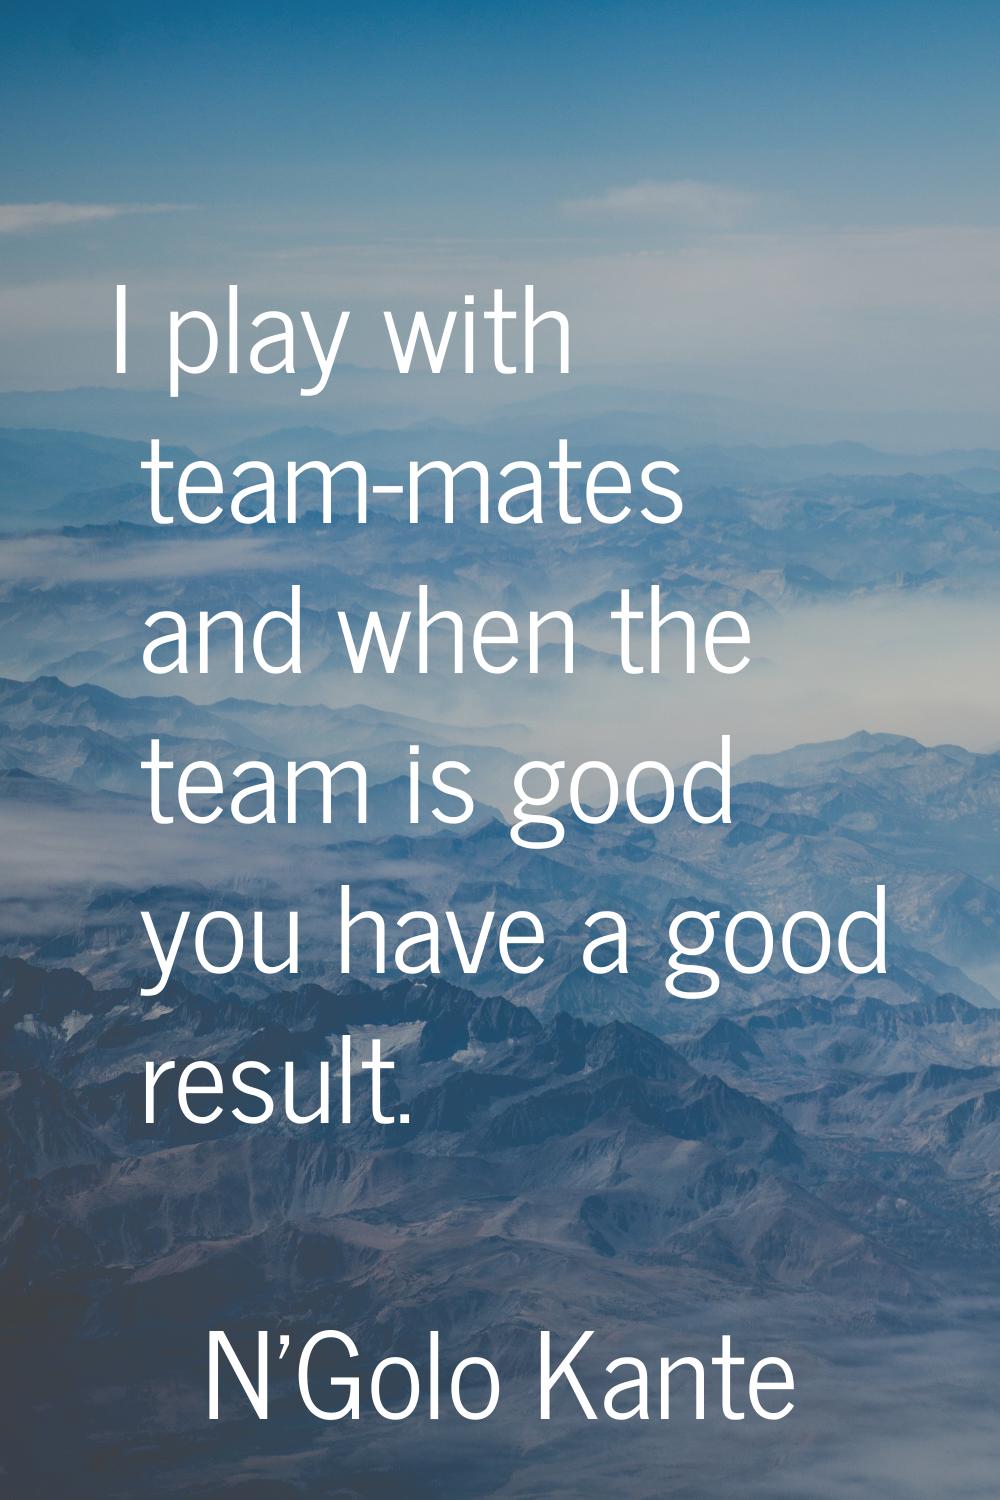 I play with team-mates and when the team is good you have a good result.